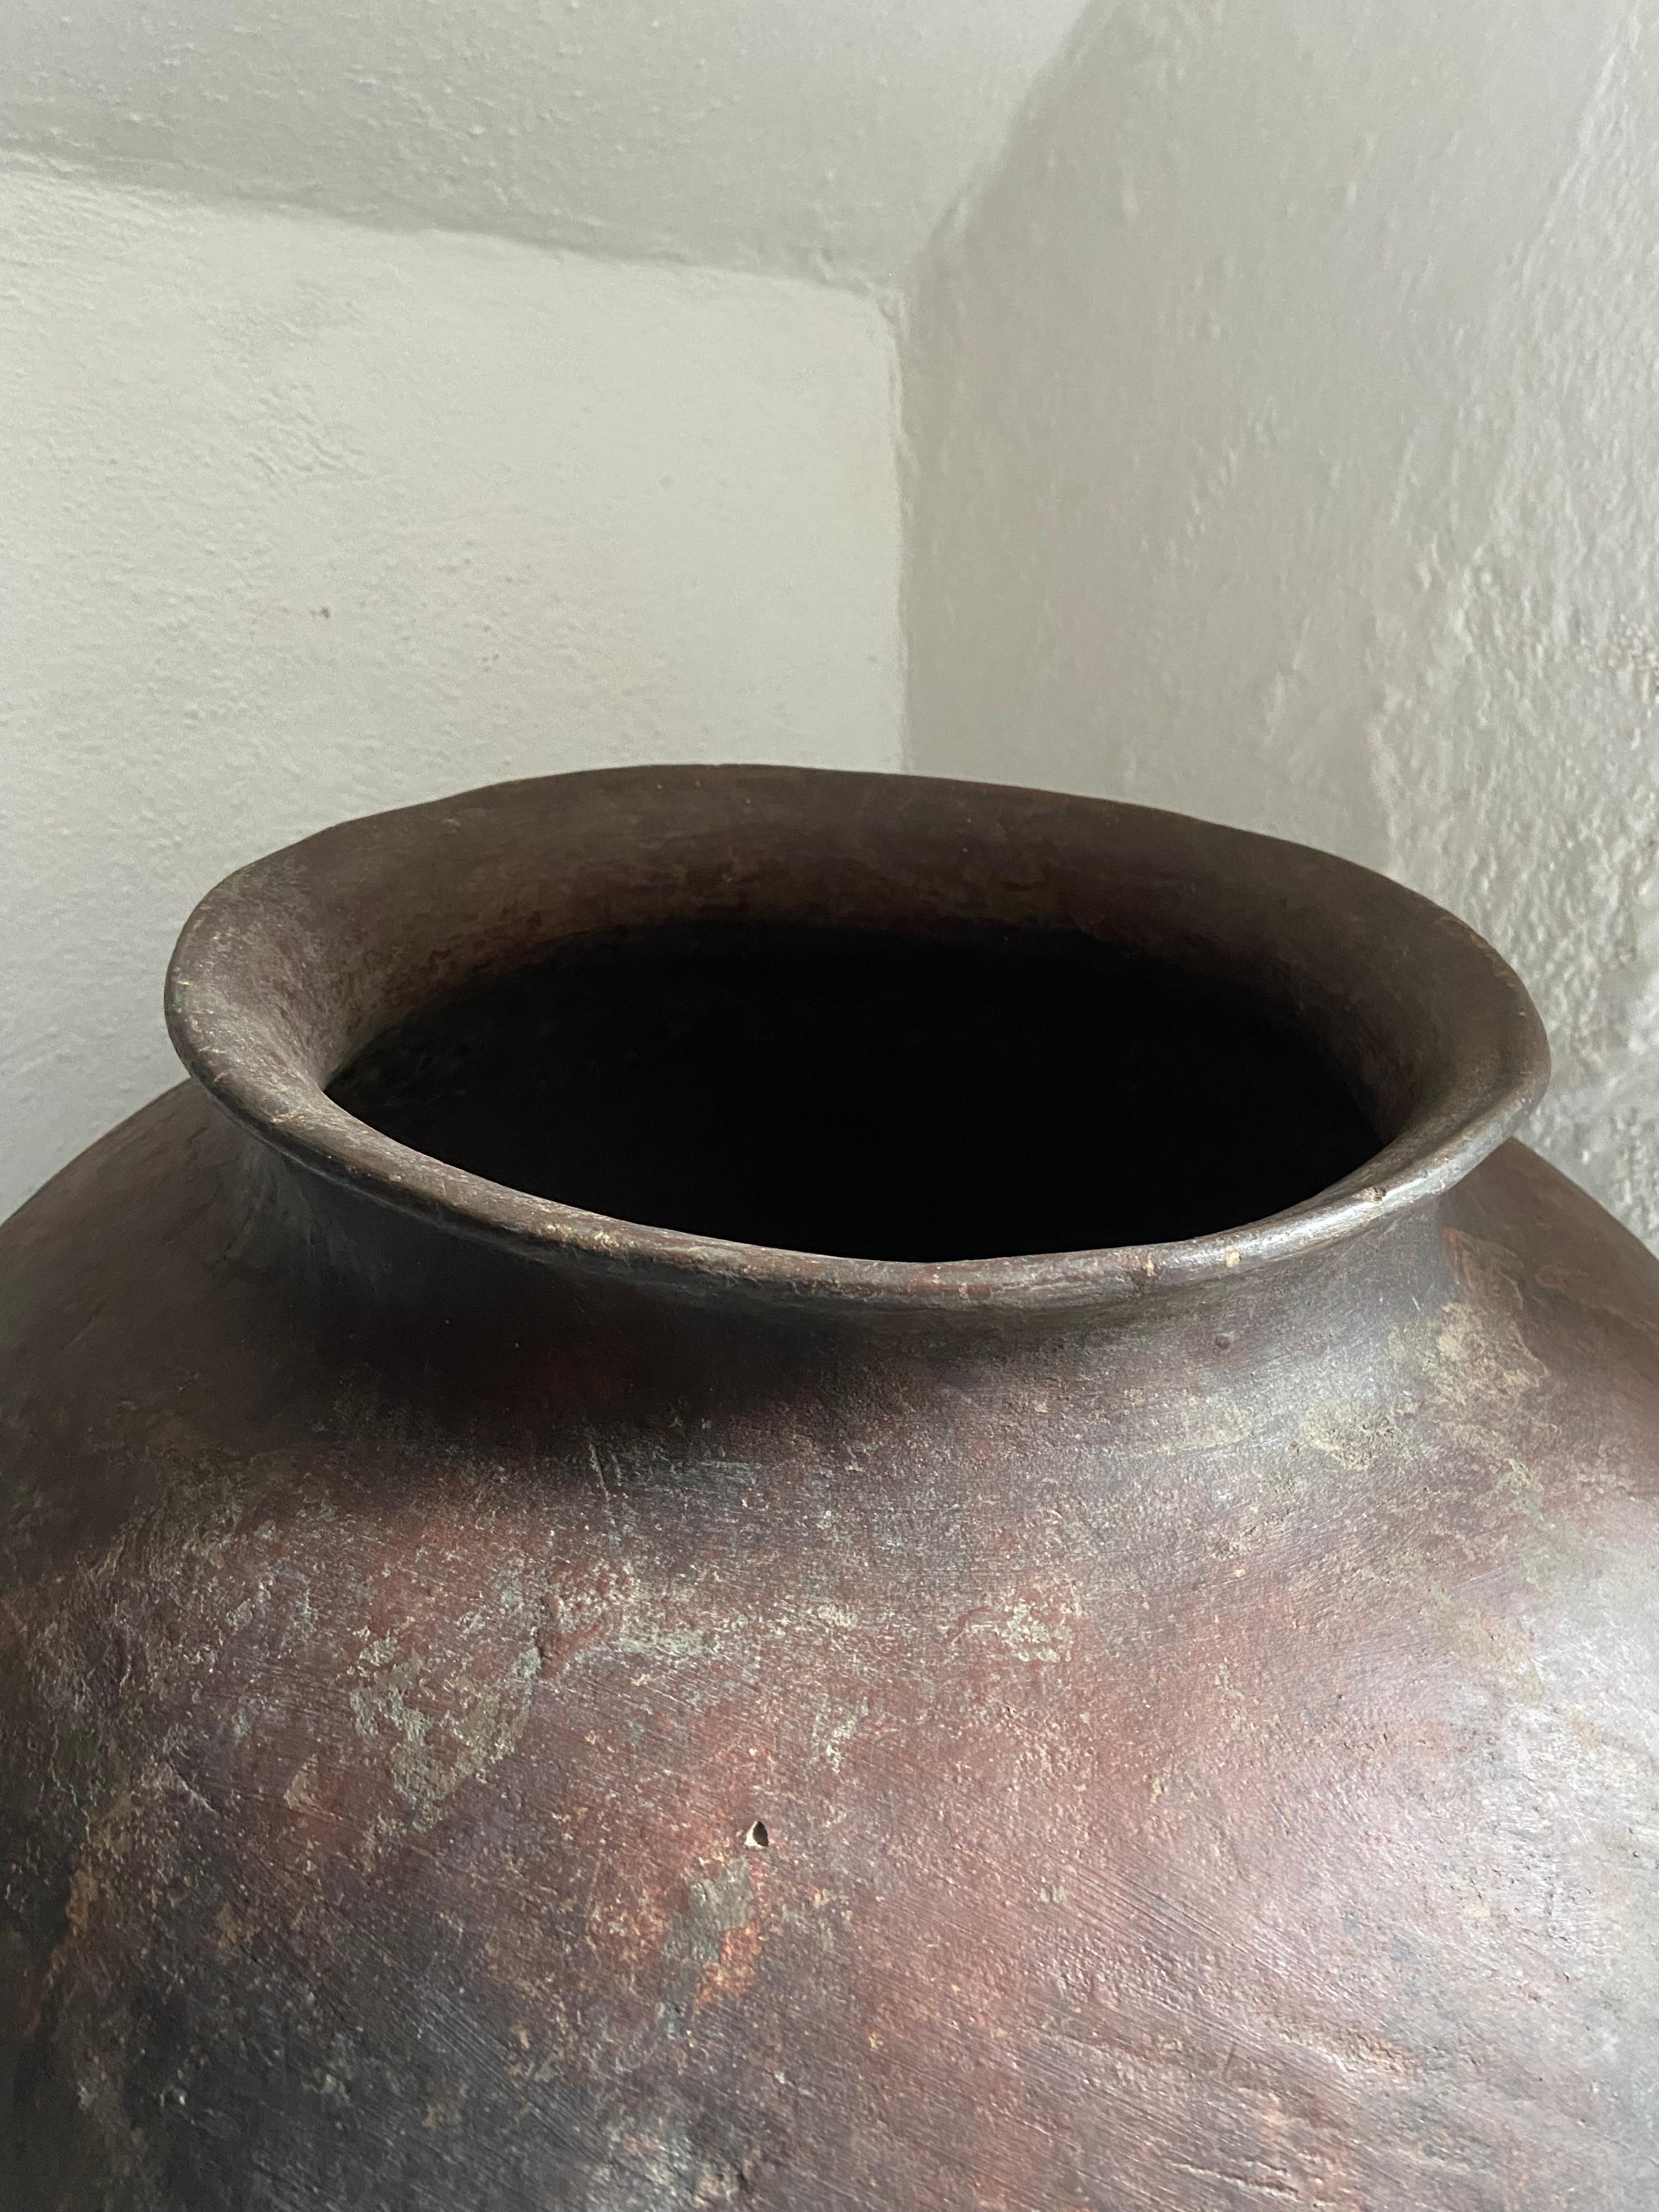 Fired Mid-20th Century Pot from Mexico